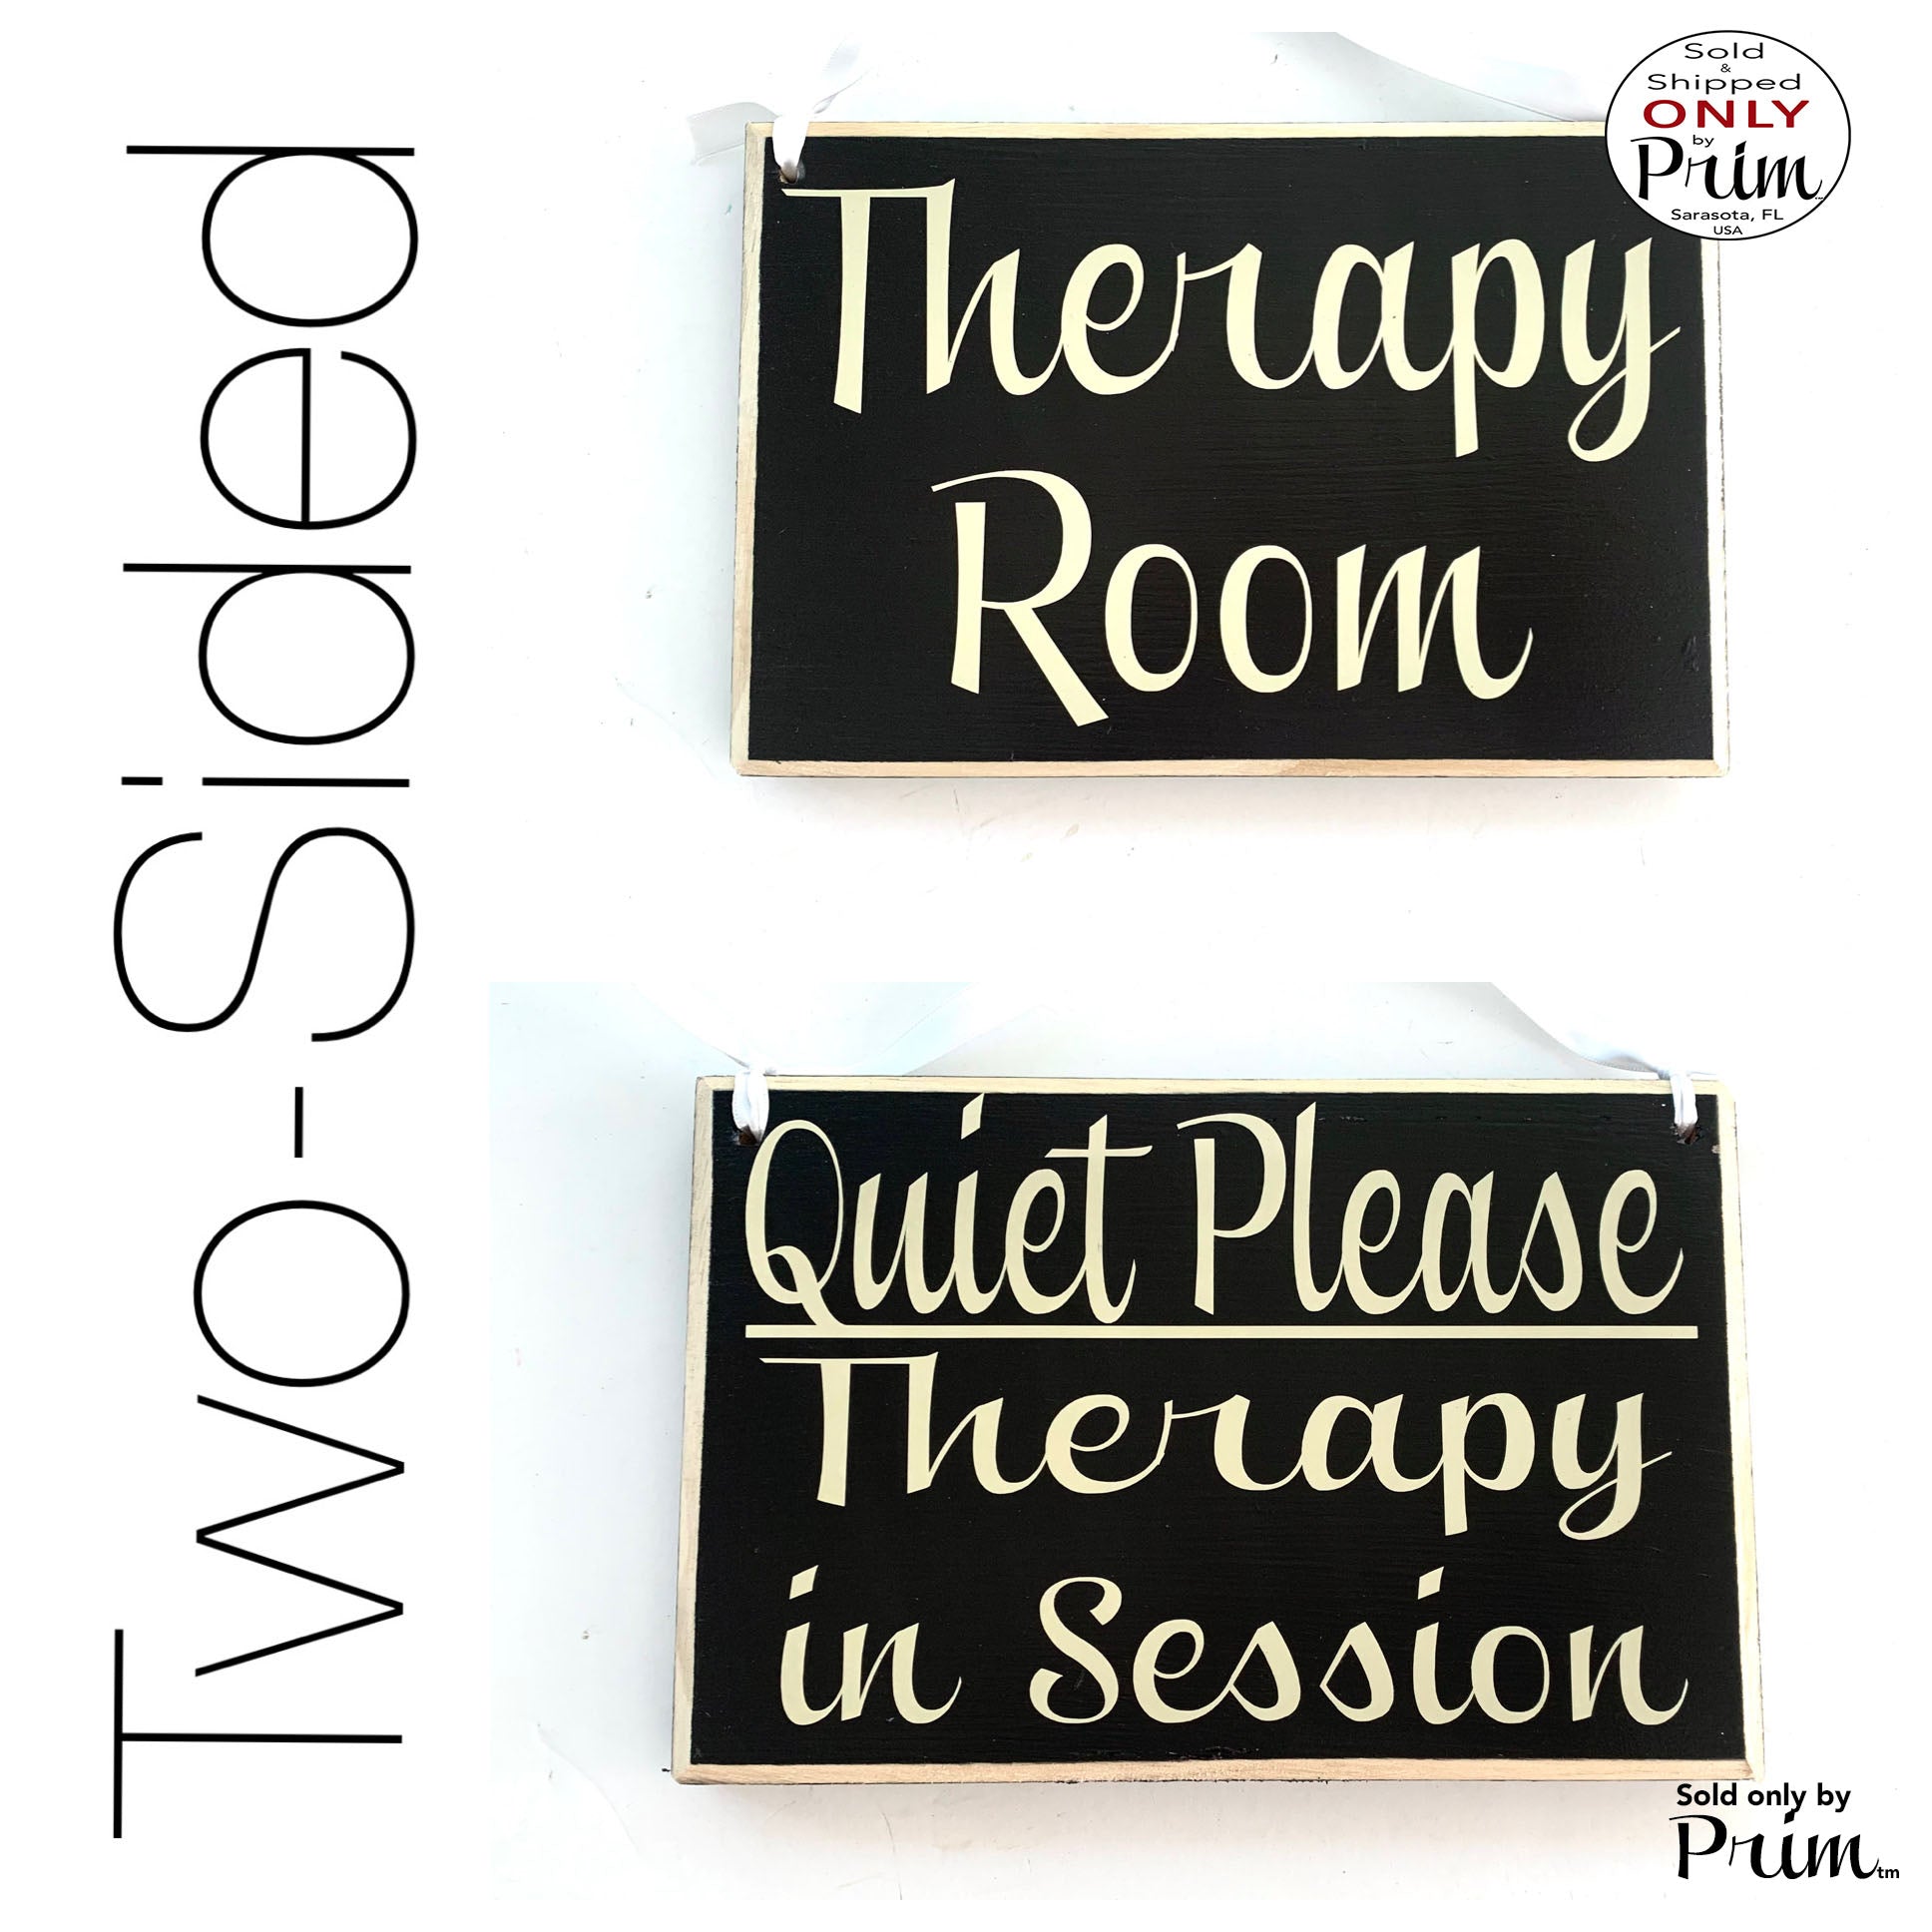 8x6 Therapy Room Quiet Please Therapy In Session Double Sided Custom Wood Sign Progress Do Not Disturb Counseling Treatment Door Plaque Designs by Prim